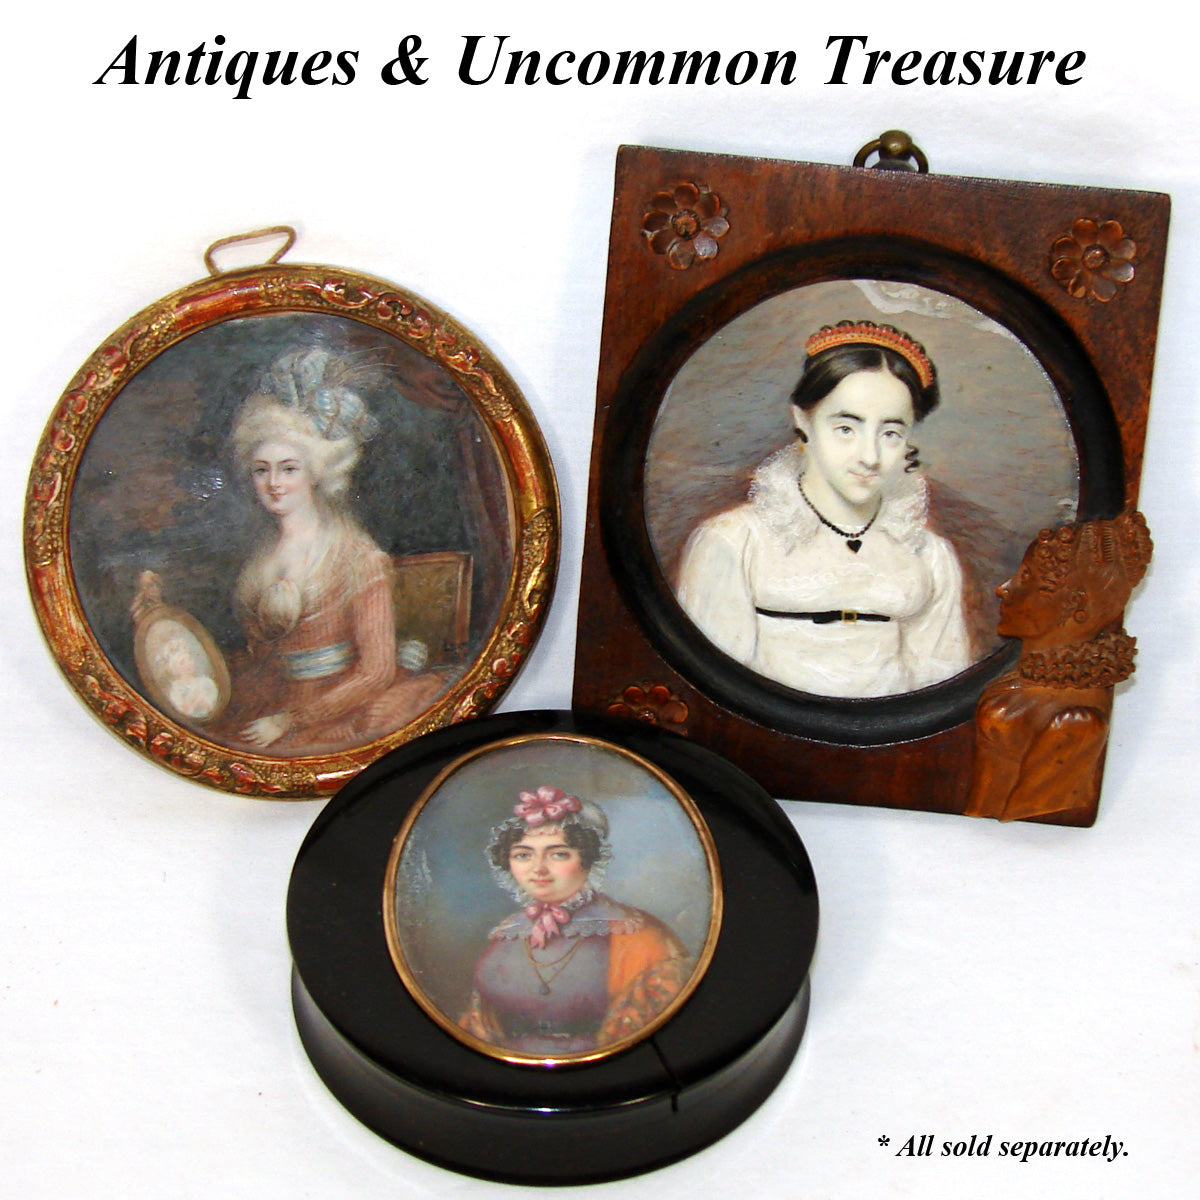 Antique French Portrait Miniature in Carved & Gilt Wood Frame, Woman Holding Portrait of a Child